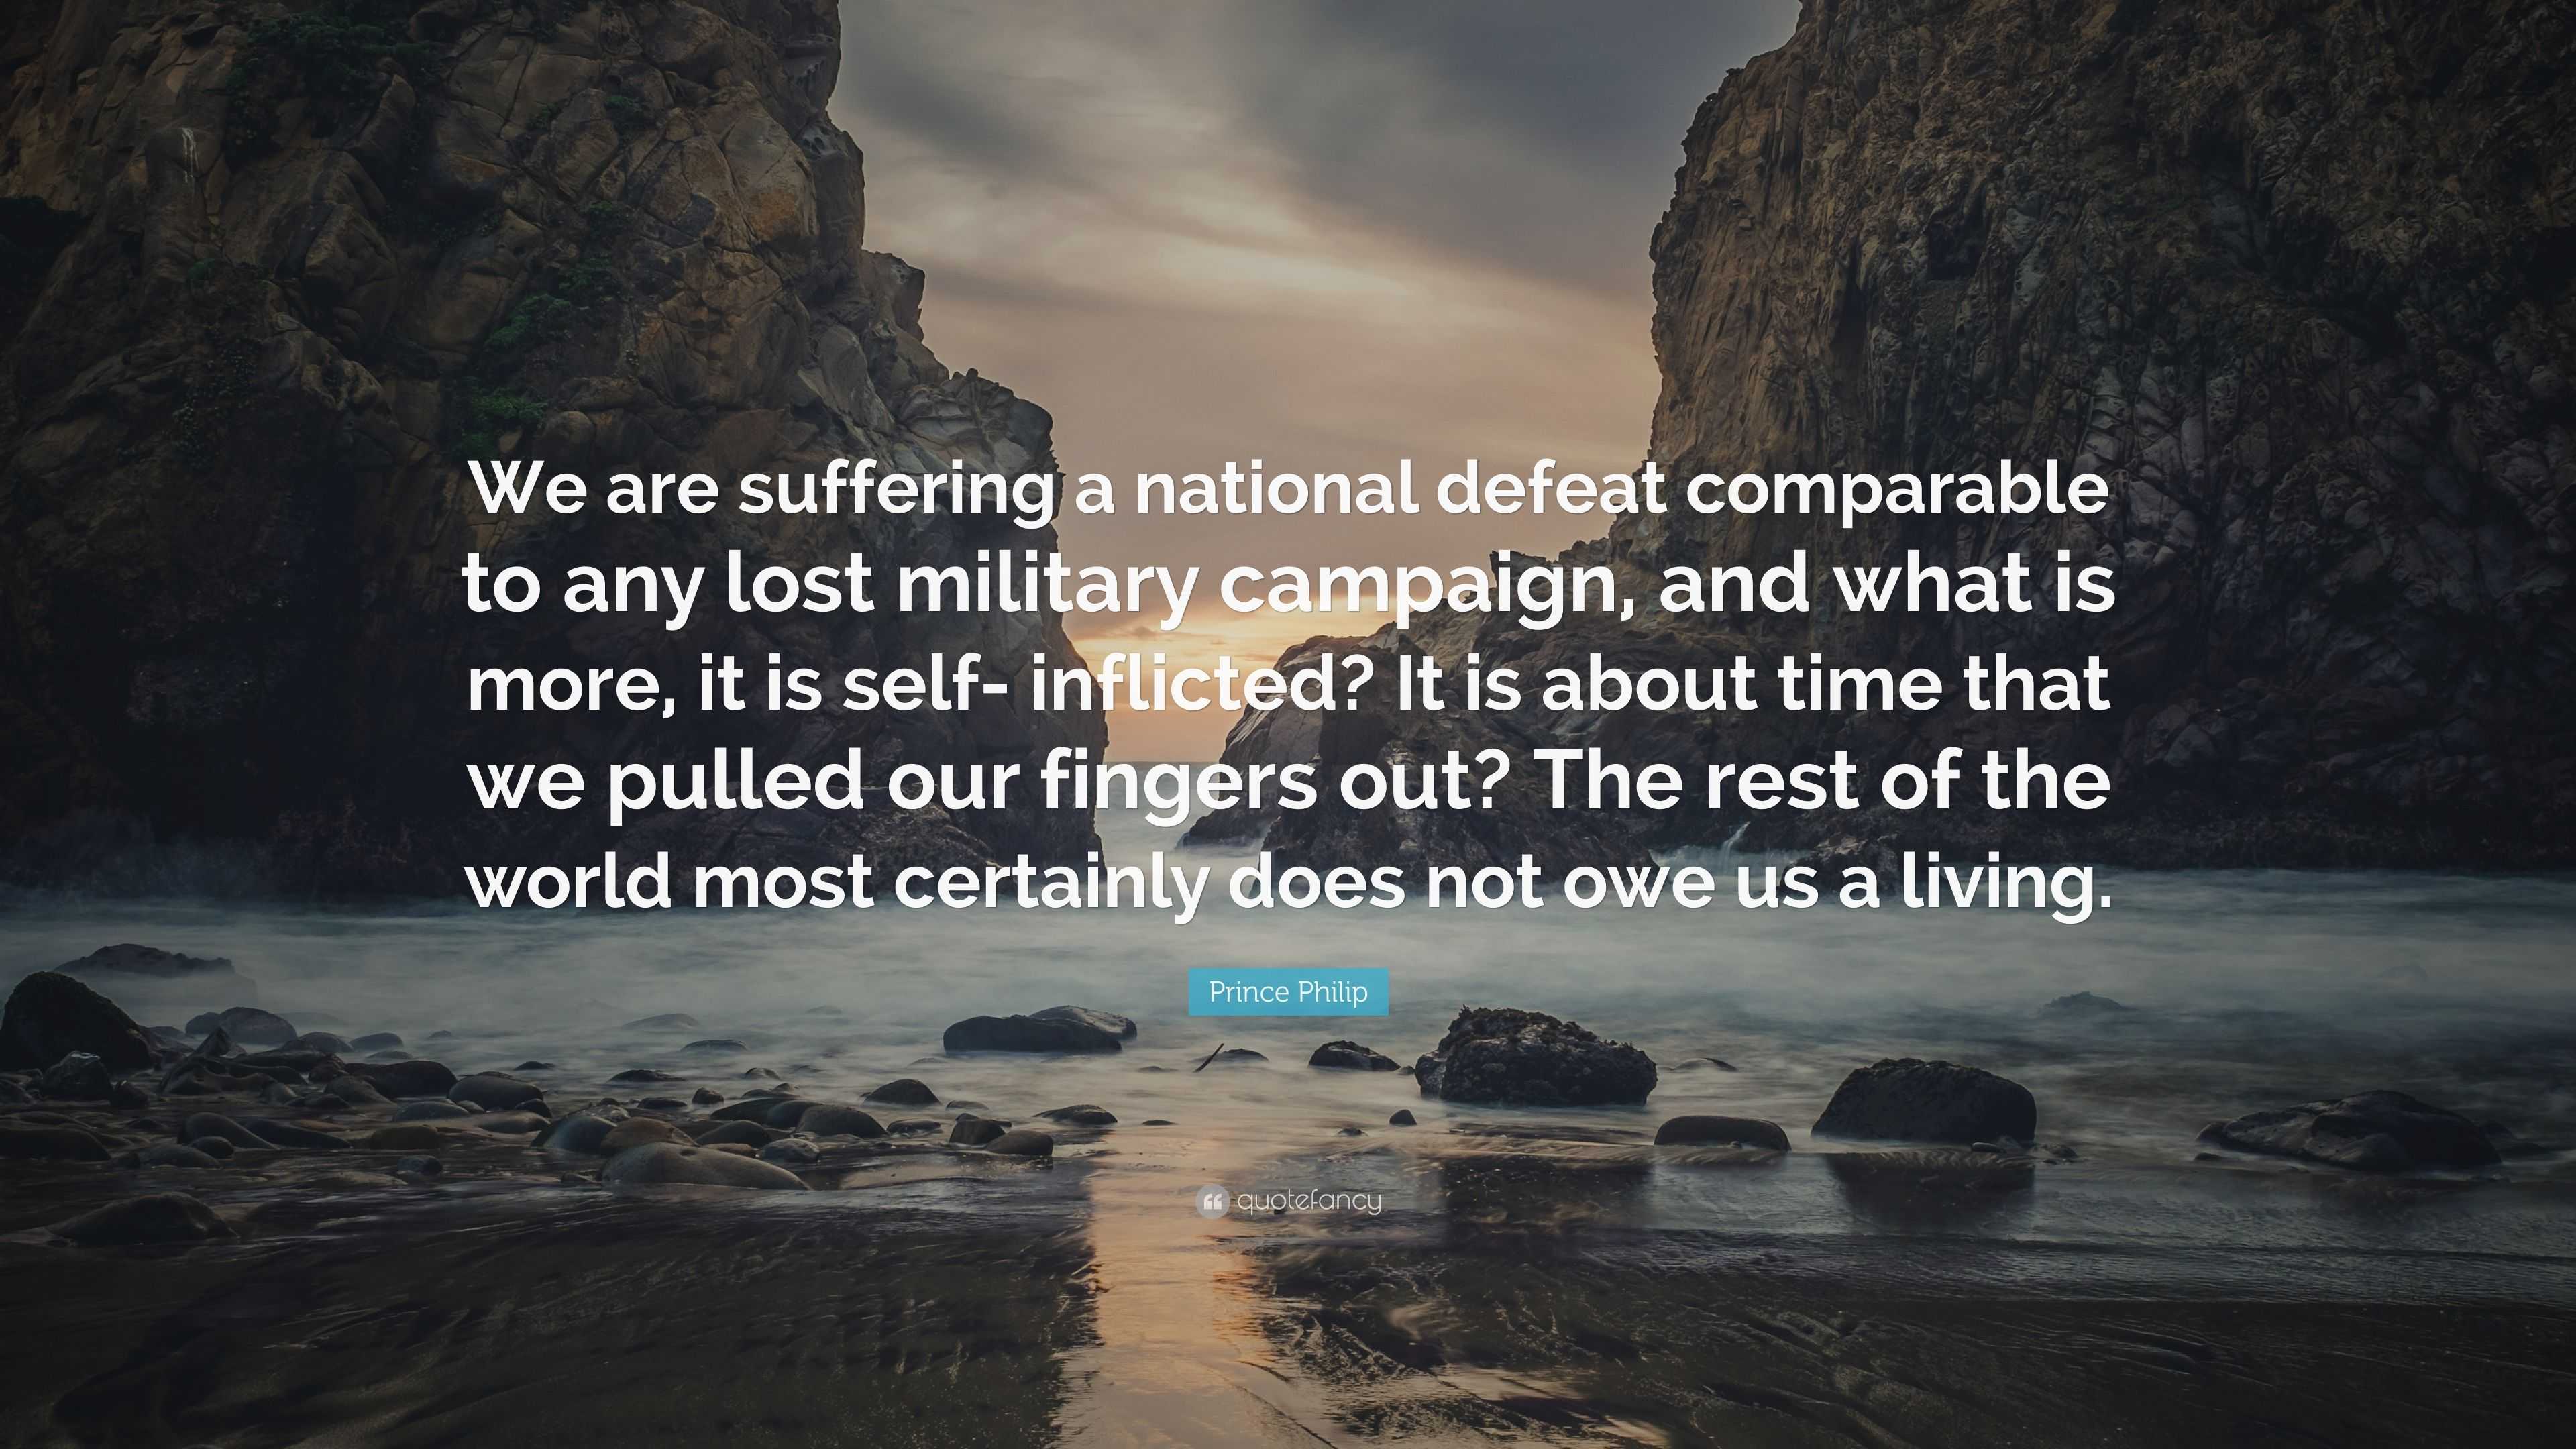 Prince Philip Quote: “We are suffering a national defeat comparable to ...